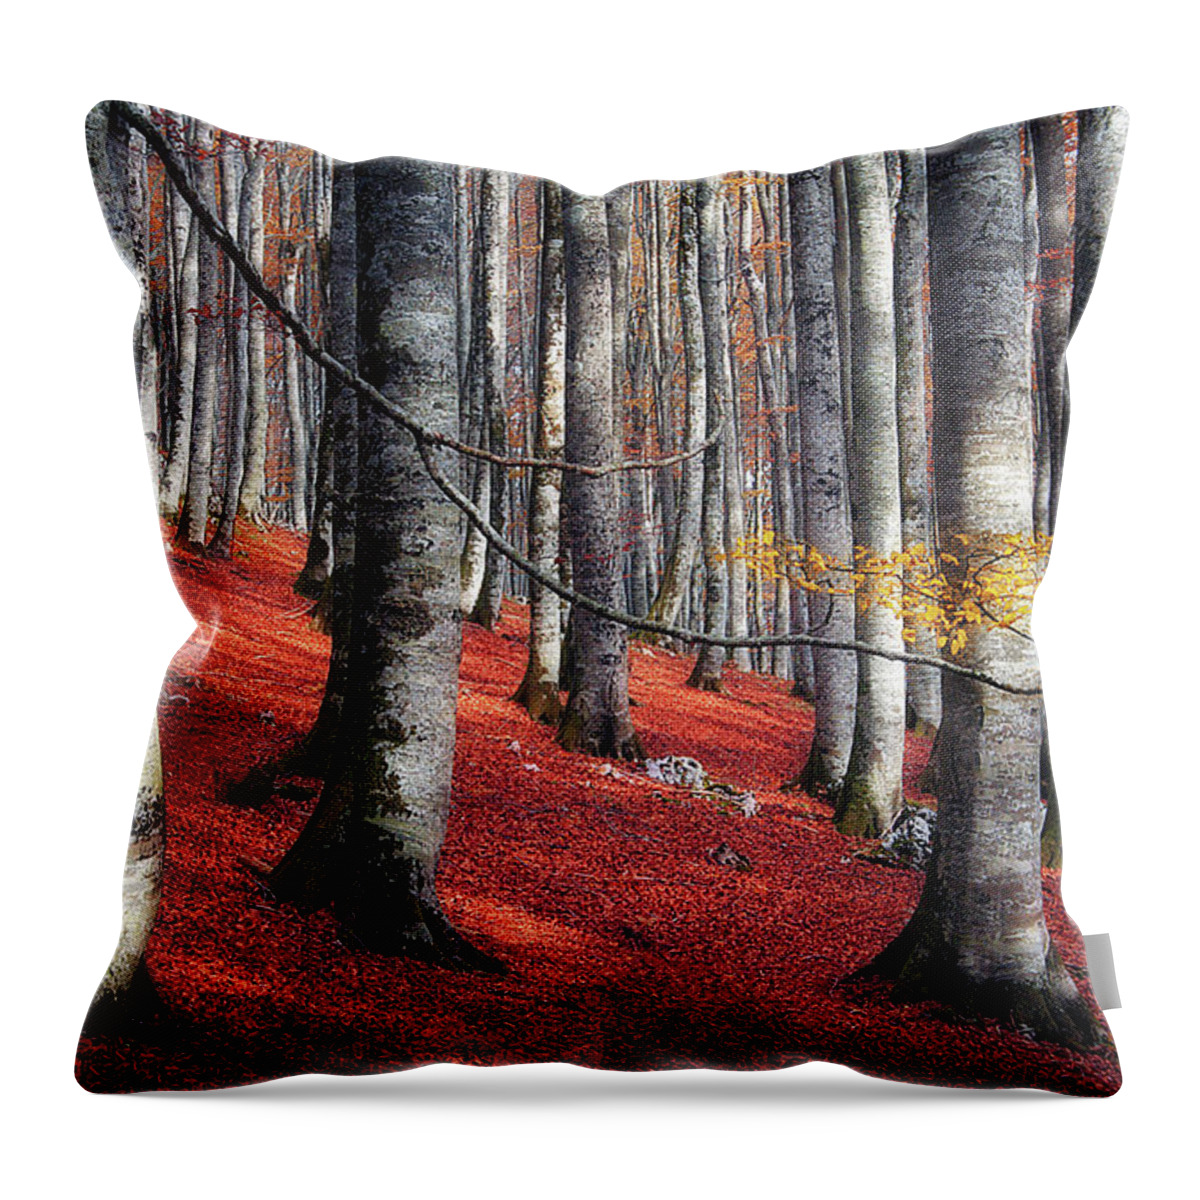 Forest Throw Pillow featuring the photograph Fragility II by Mikel Martinez de Osaba